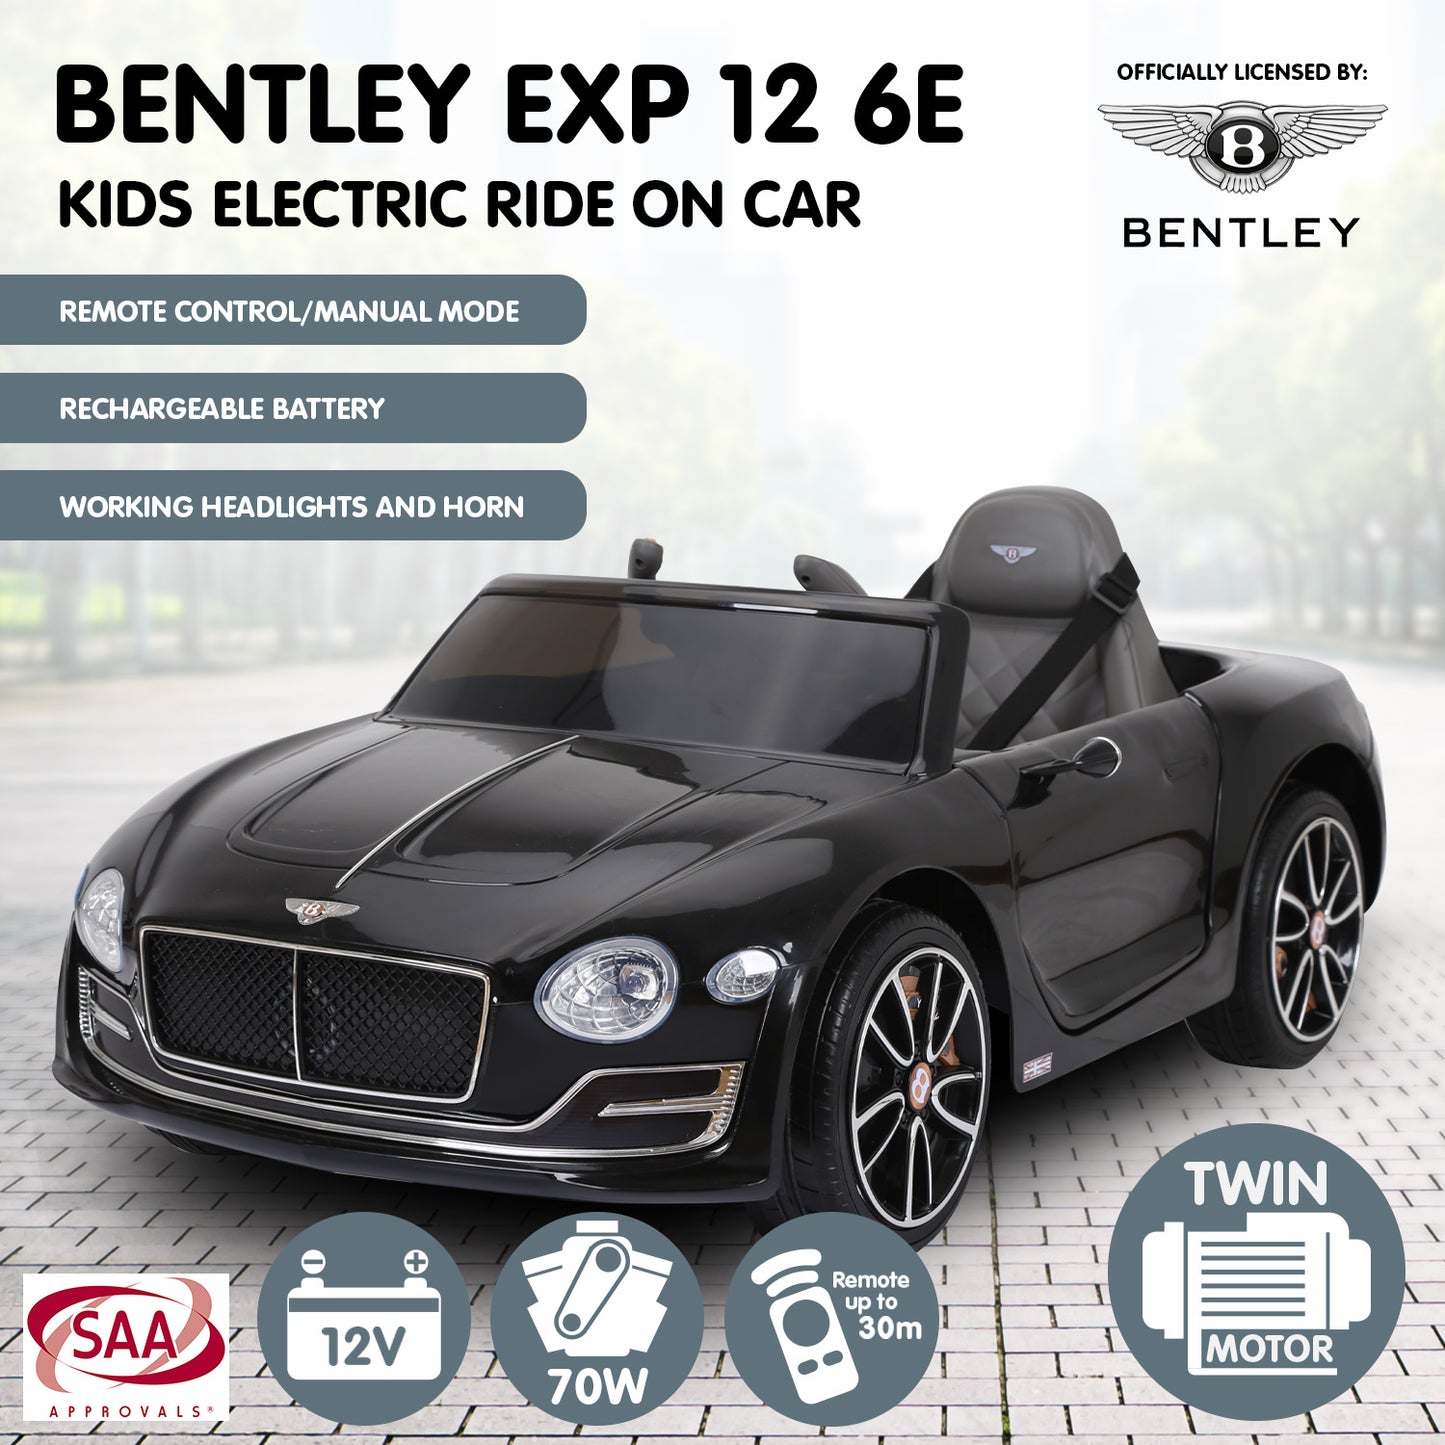 Bentley Exp 12 Licensed Speed 6E Electric Kids Ride On Car - Black